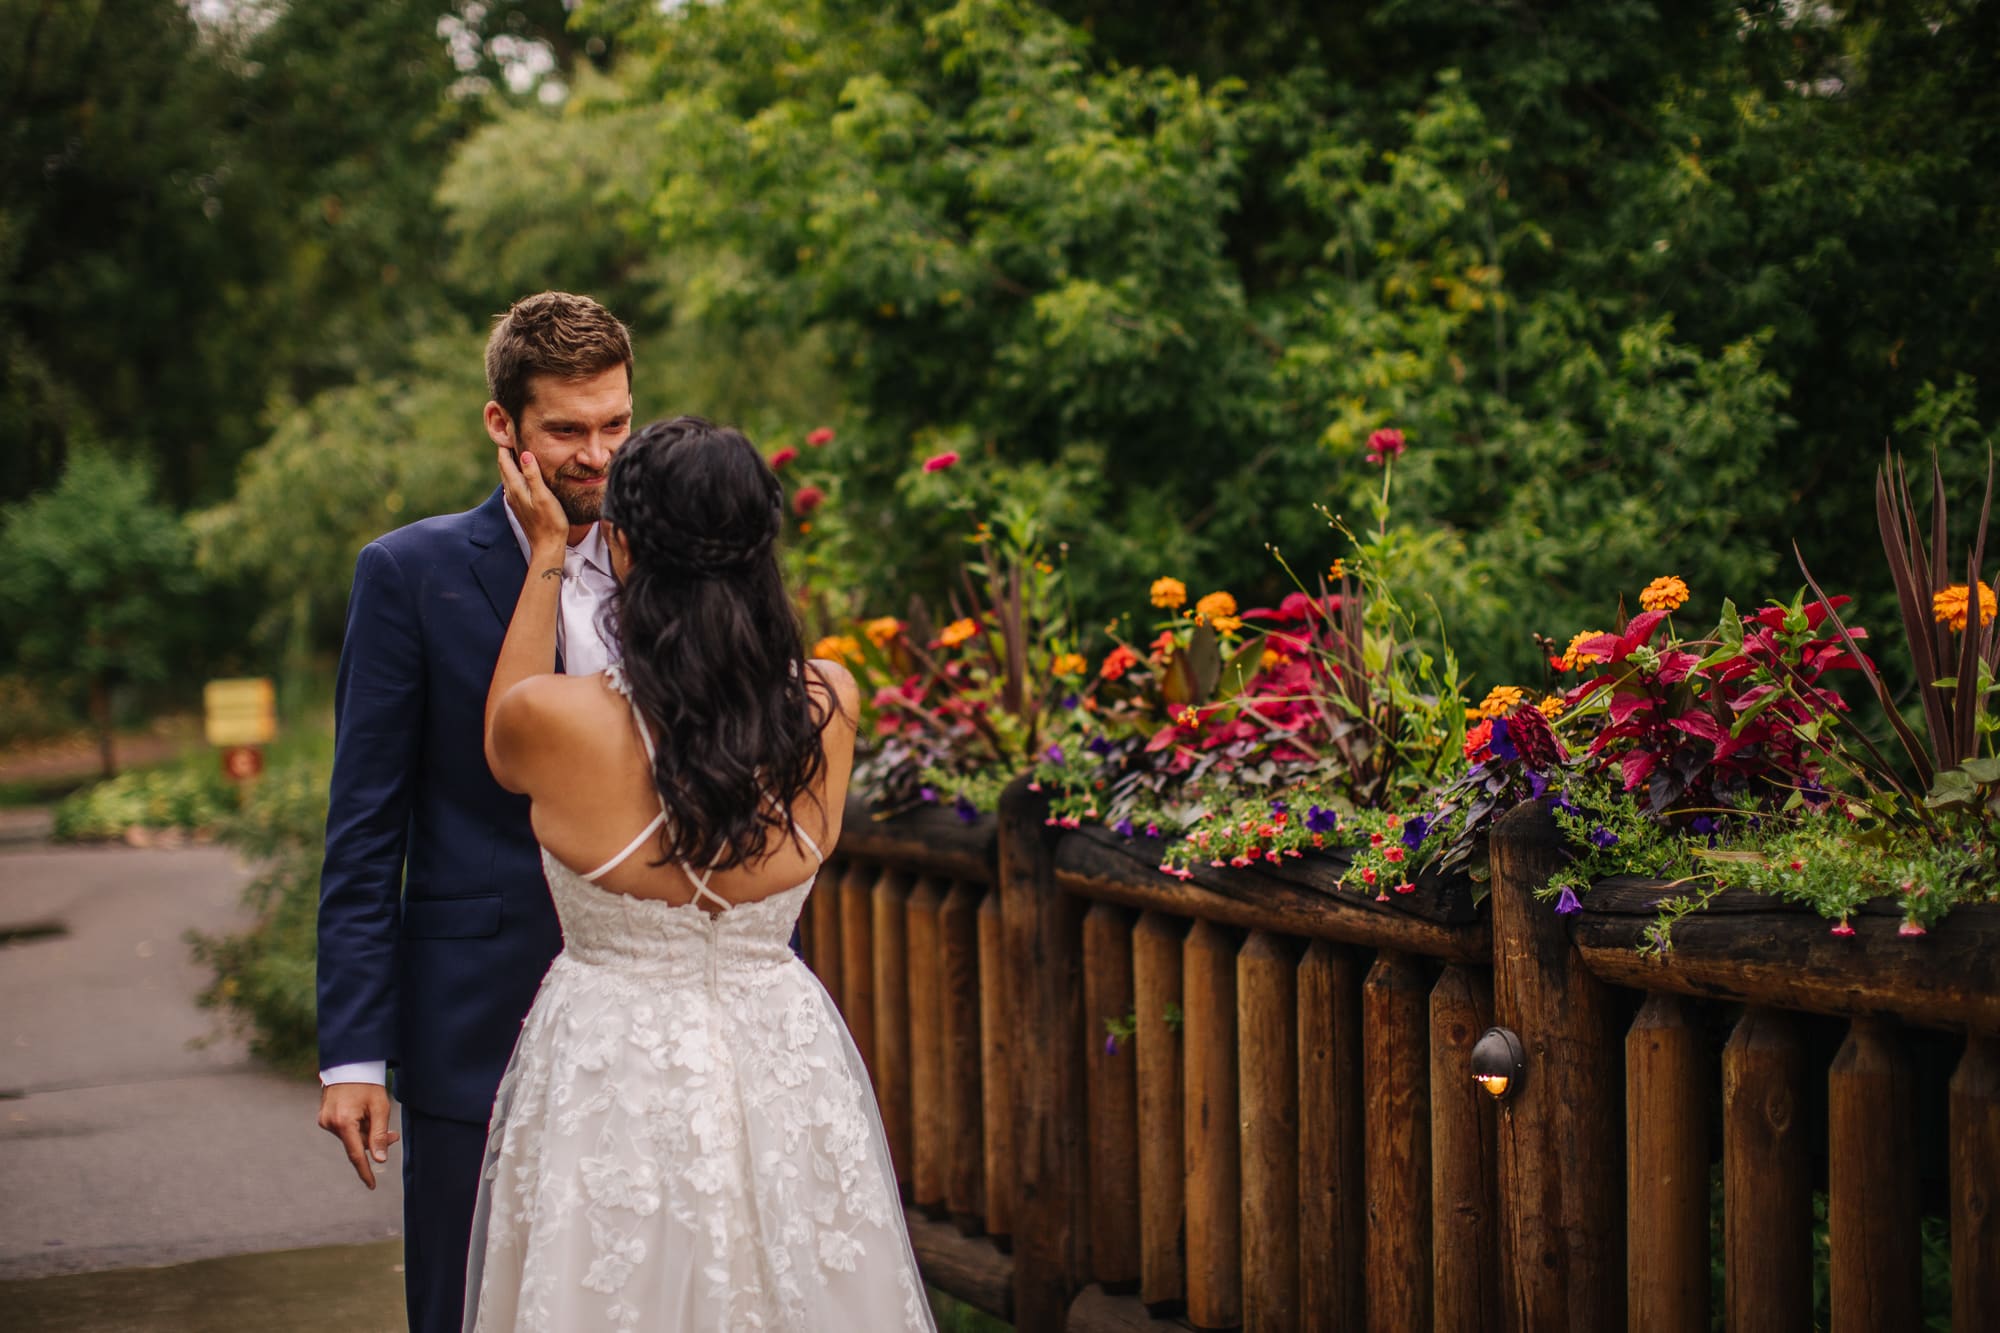 wedding first look, first look with bride and groom, colorado wedding photographer, wedding moments, wedding first looks, chatfield farm wedding, colorado wedding venue, rainy wedding, garden wedding, colorado garden wedding, chatfield farm botanic gardens denver